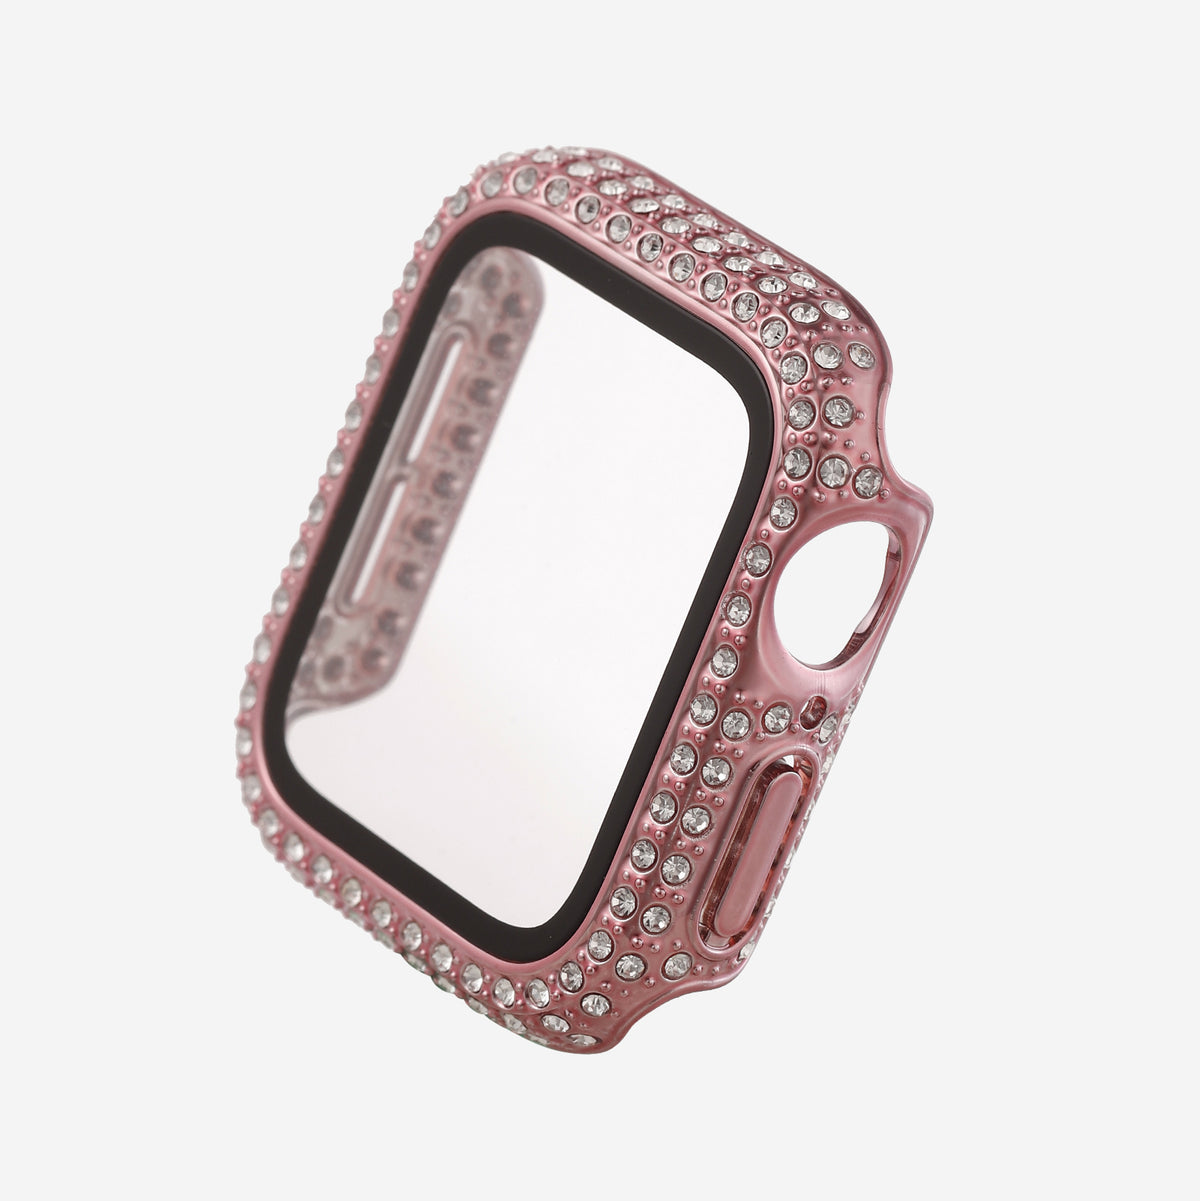 Apple Watch Crystal Screen Protector Case - Rose Gold